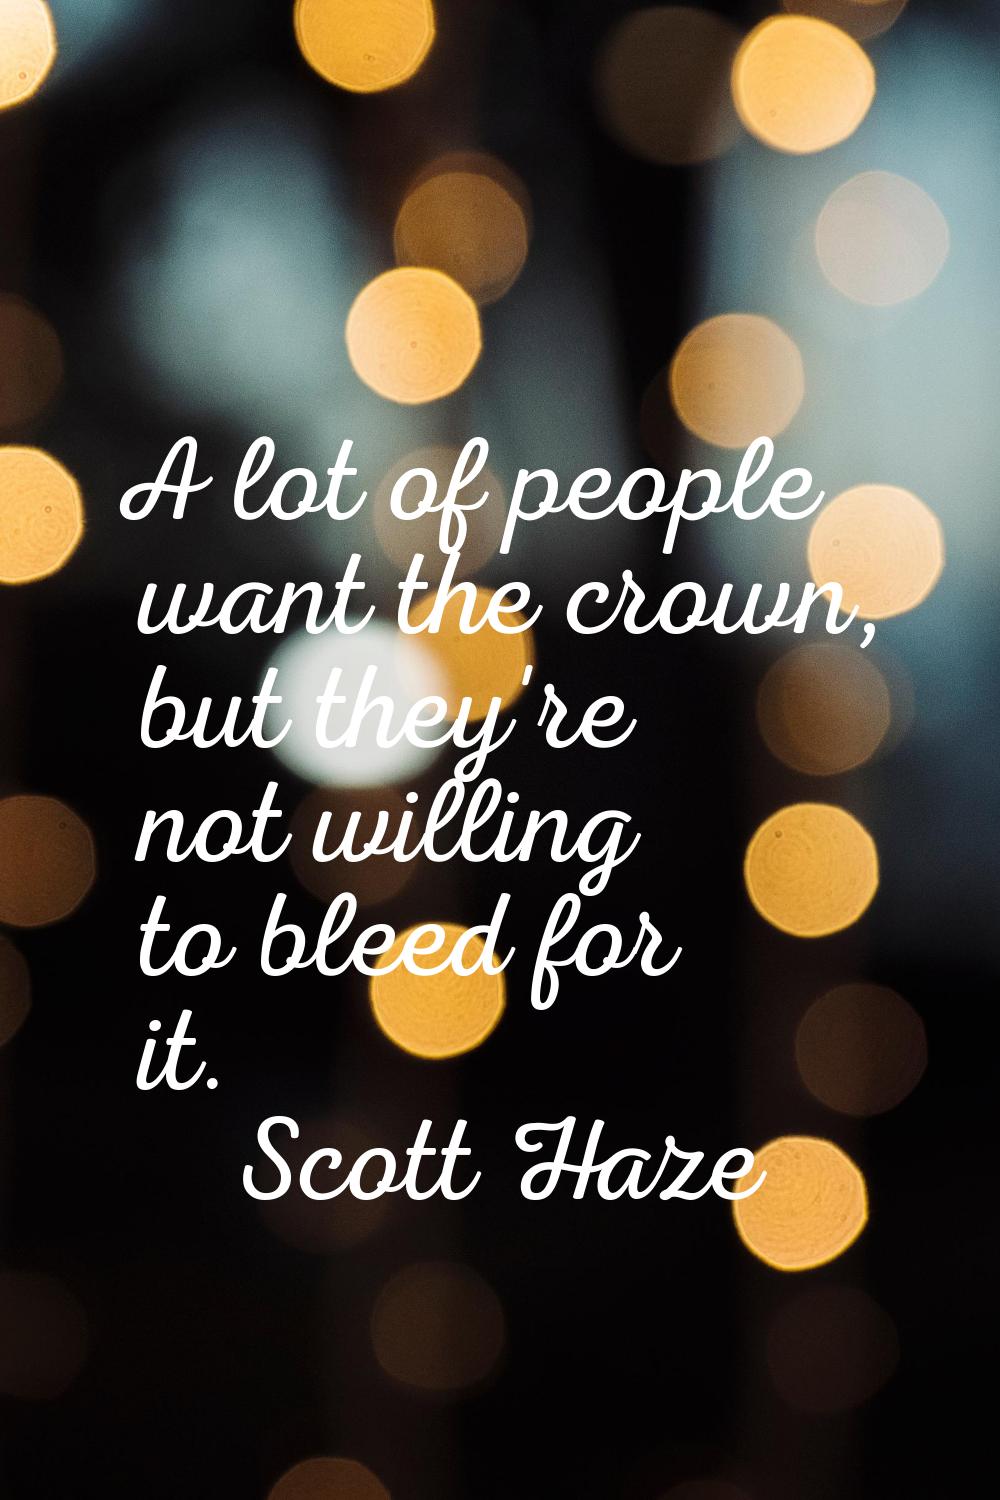 A lot of people want the crown, but they're not willing to bleed for it.